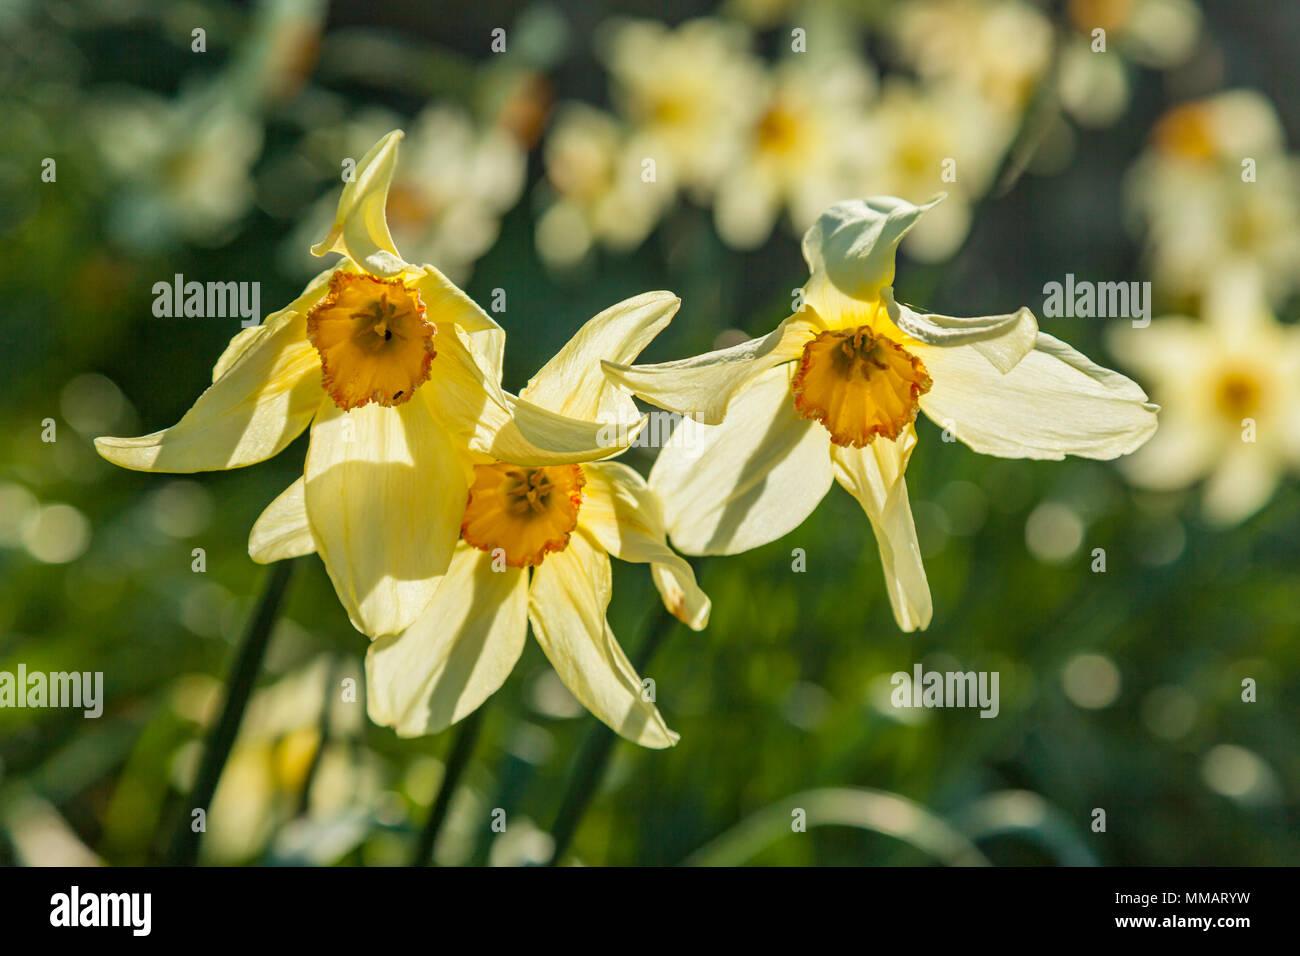 Daffodils in the East Sussex countryside, England. Stock Photo